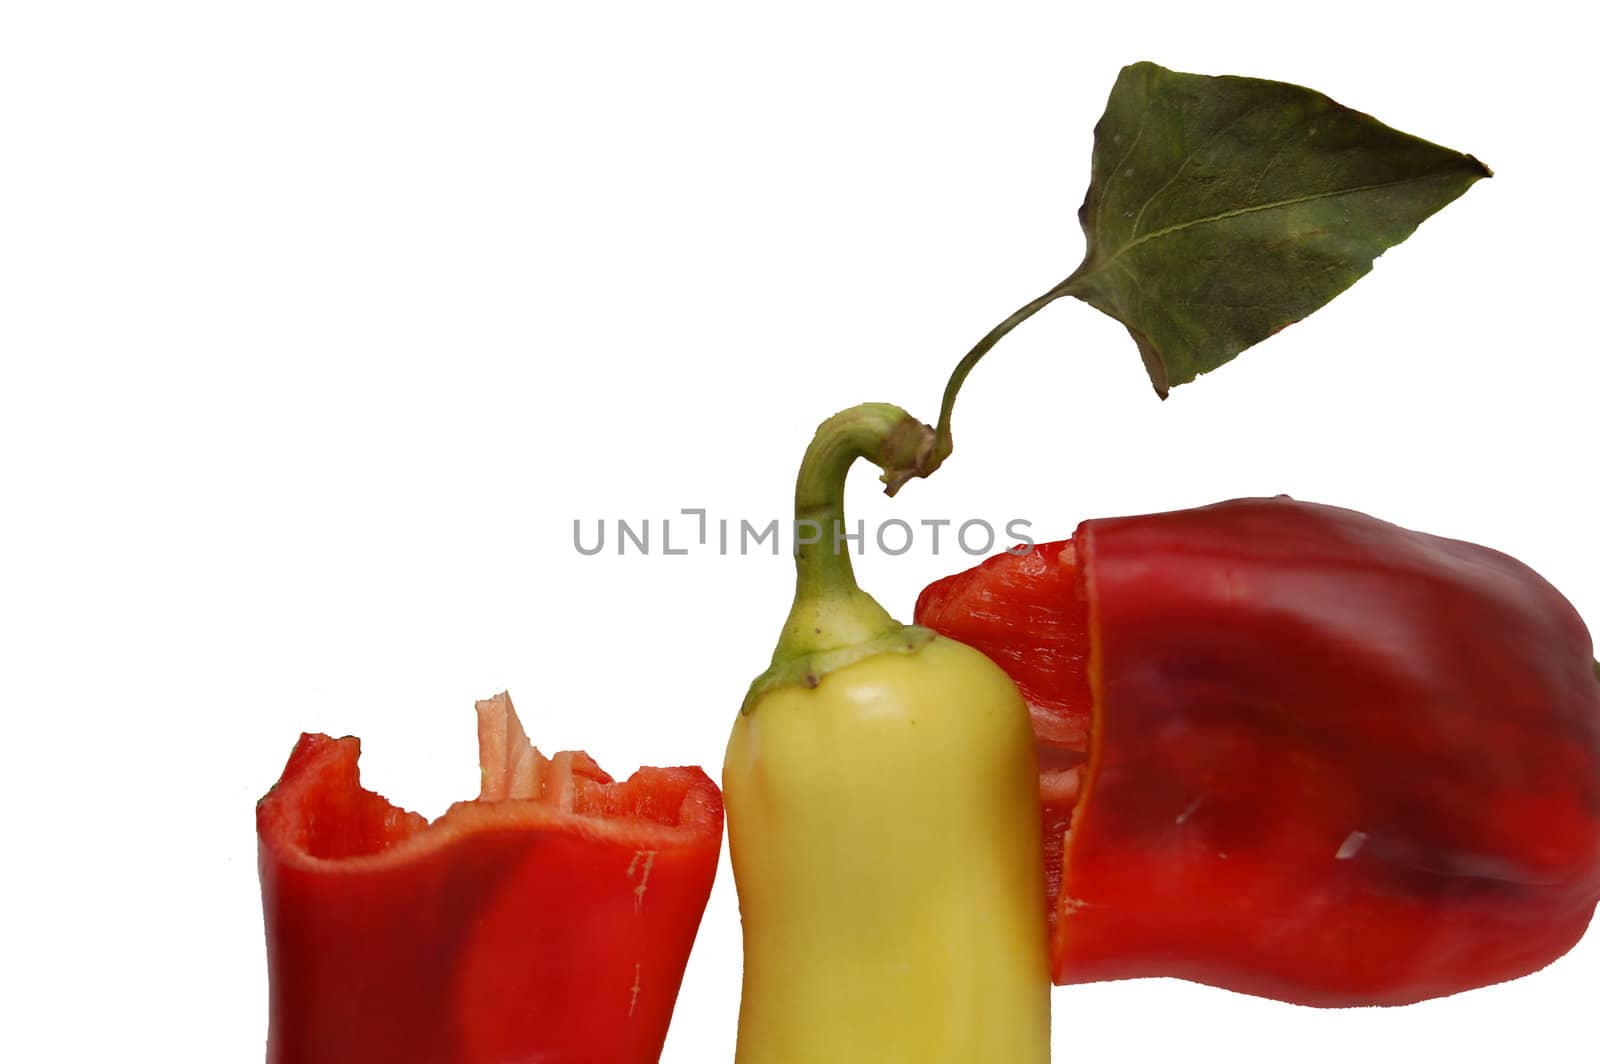 green and red pepper